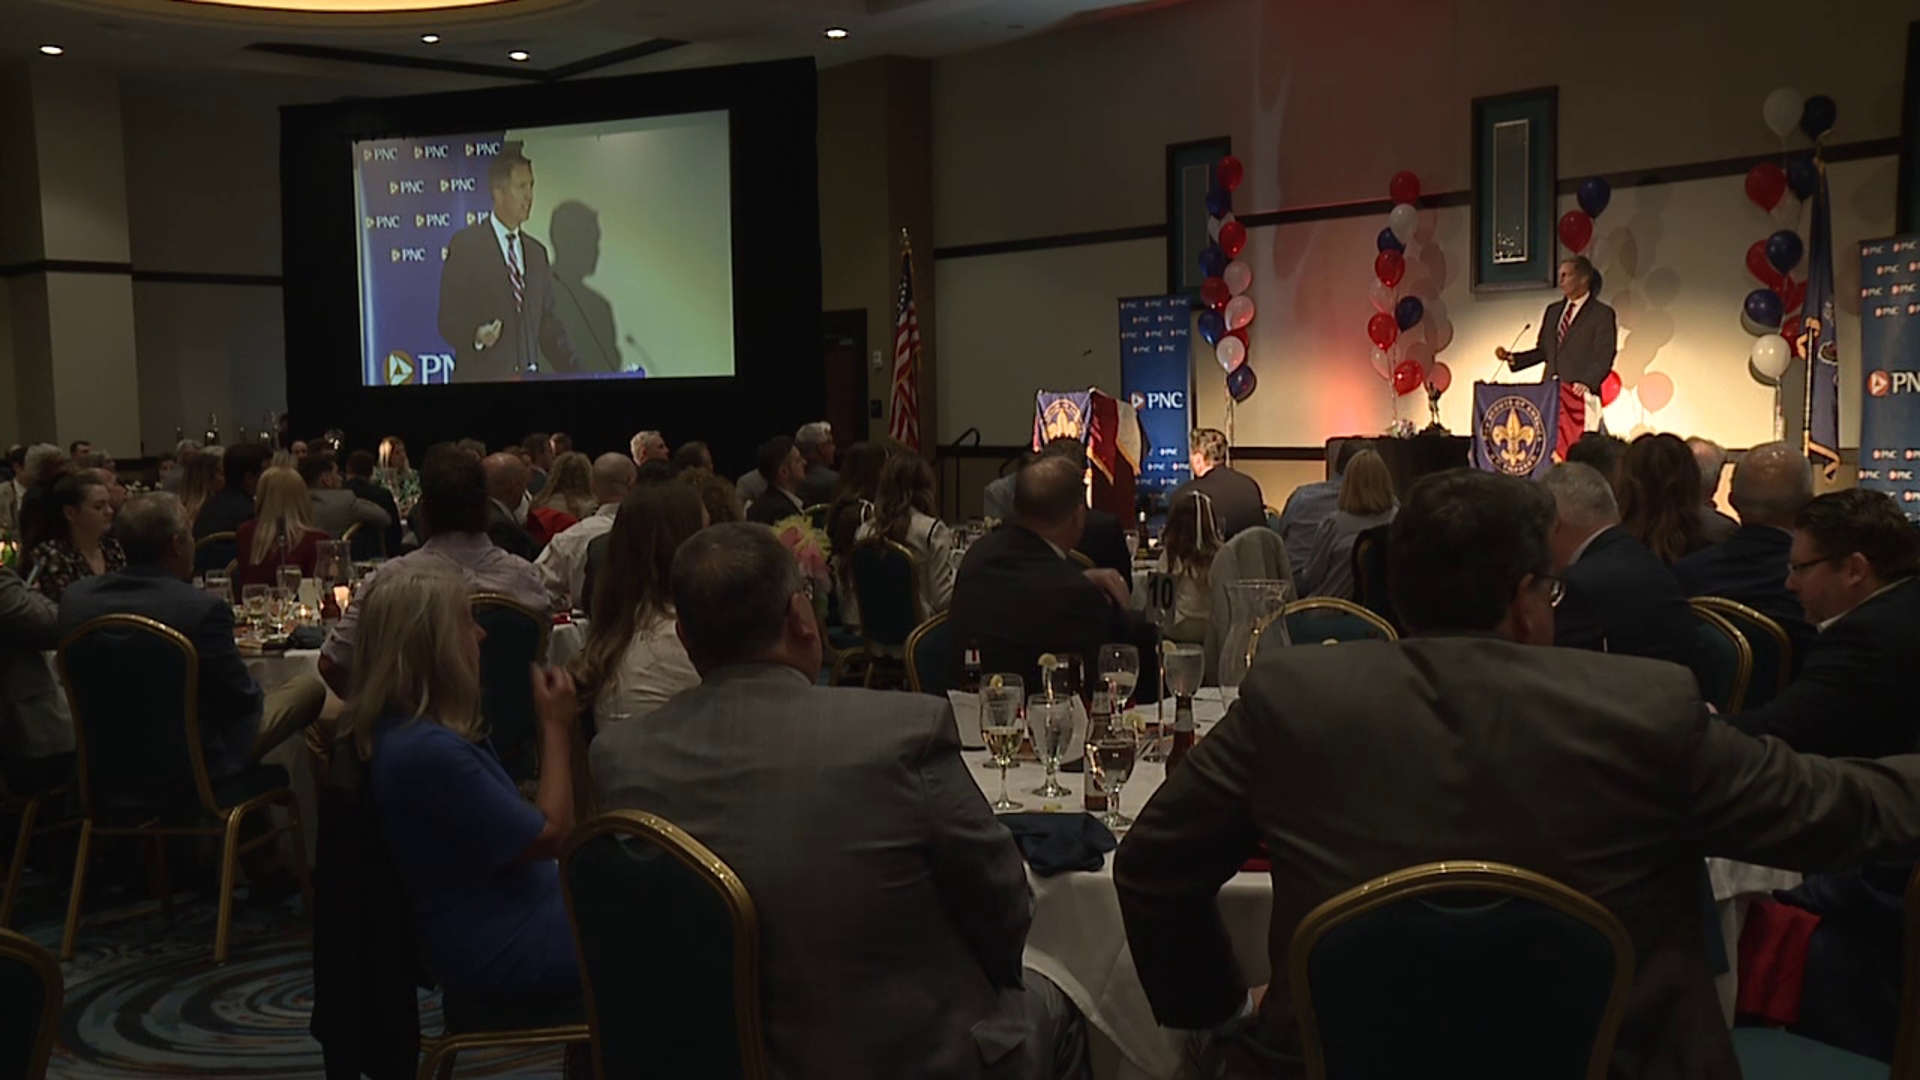 Hundreds turned out for the event that raised $130,000 for youth scouting programs.